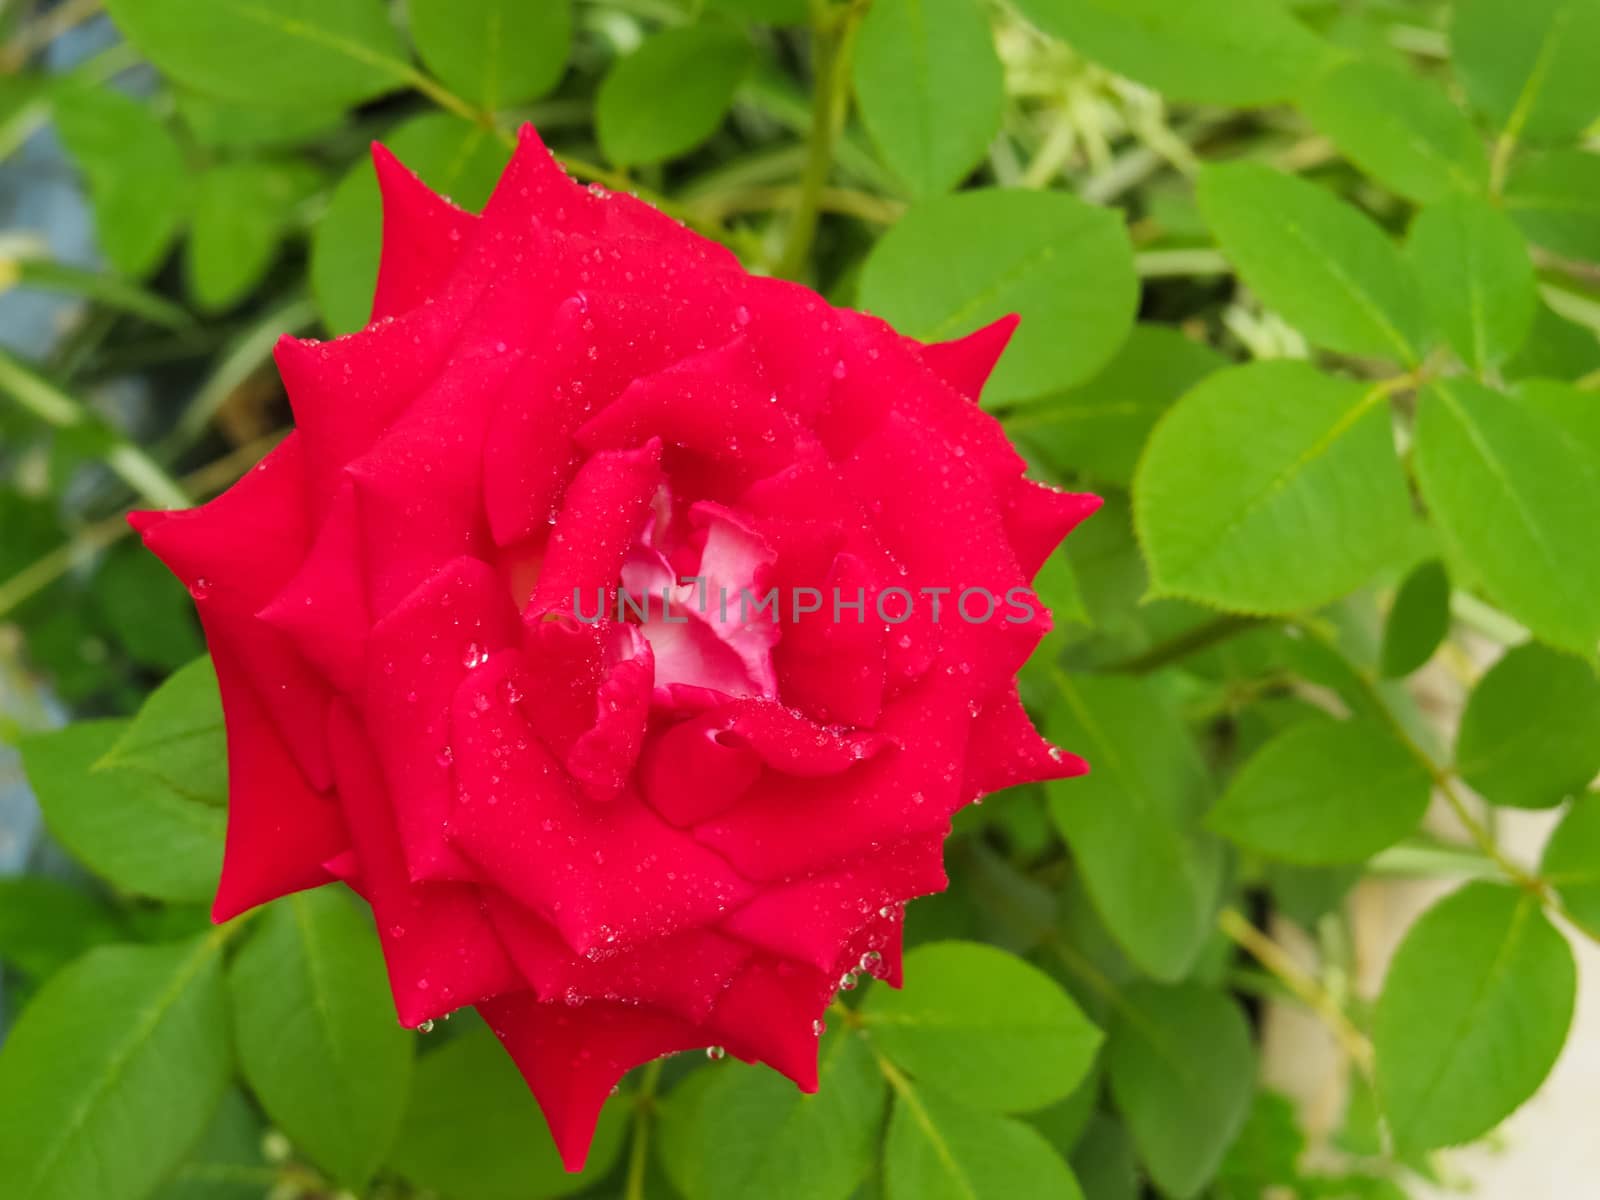 Rose flower in red color with water droplets on petals on blurred background.